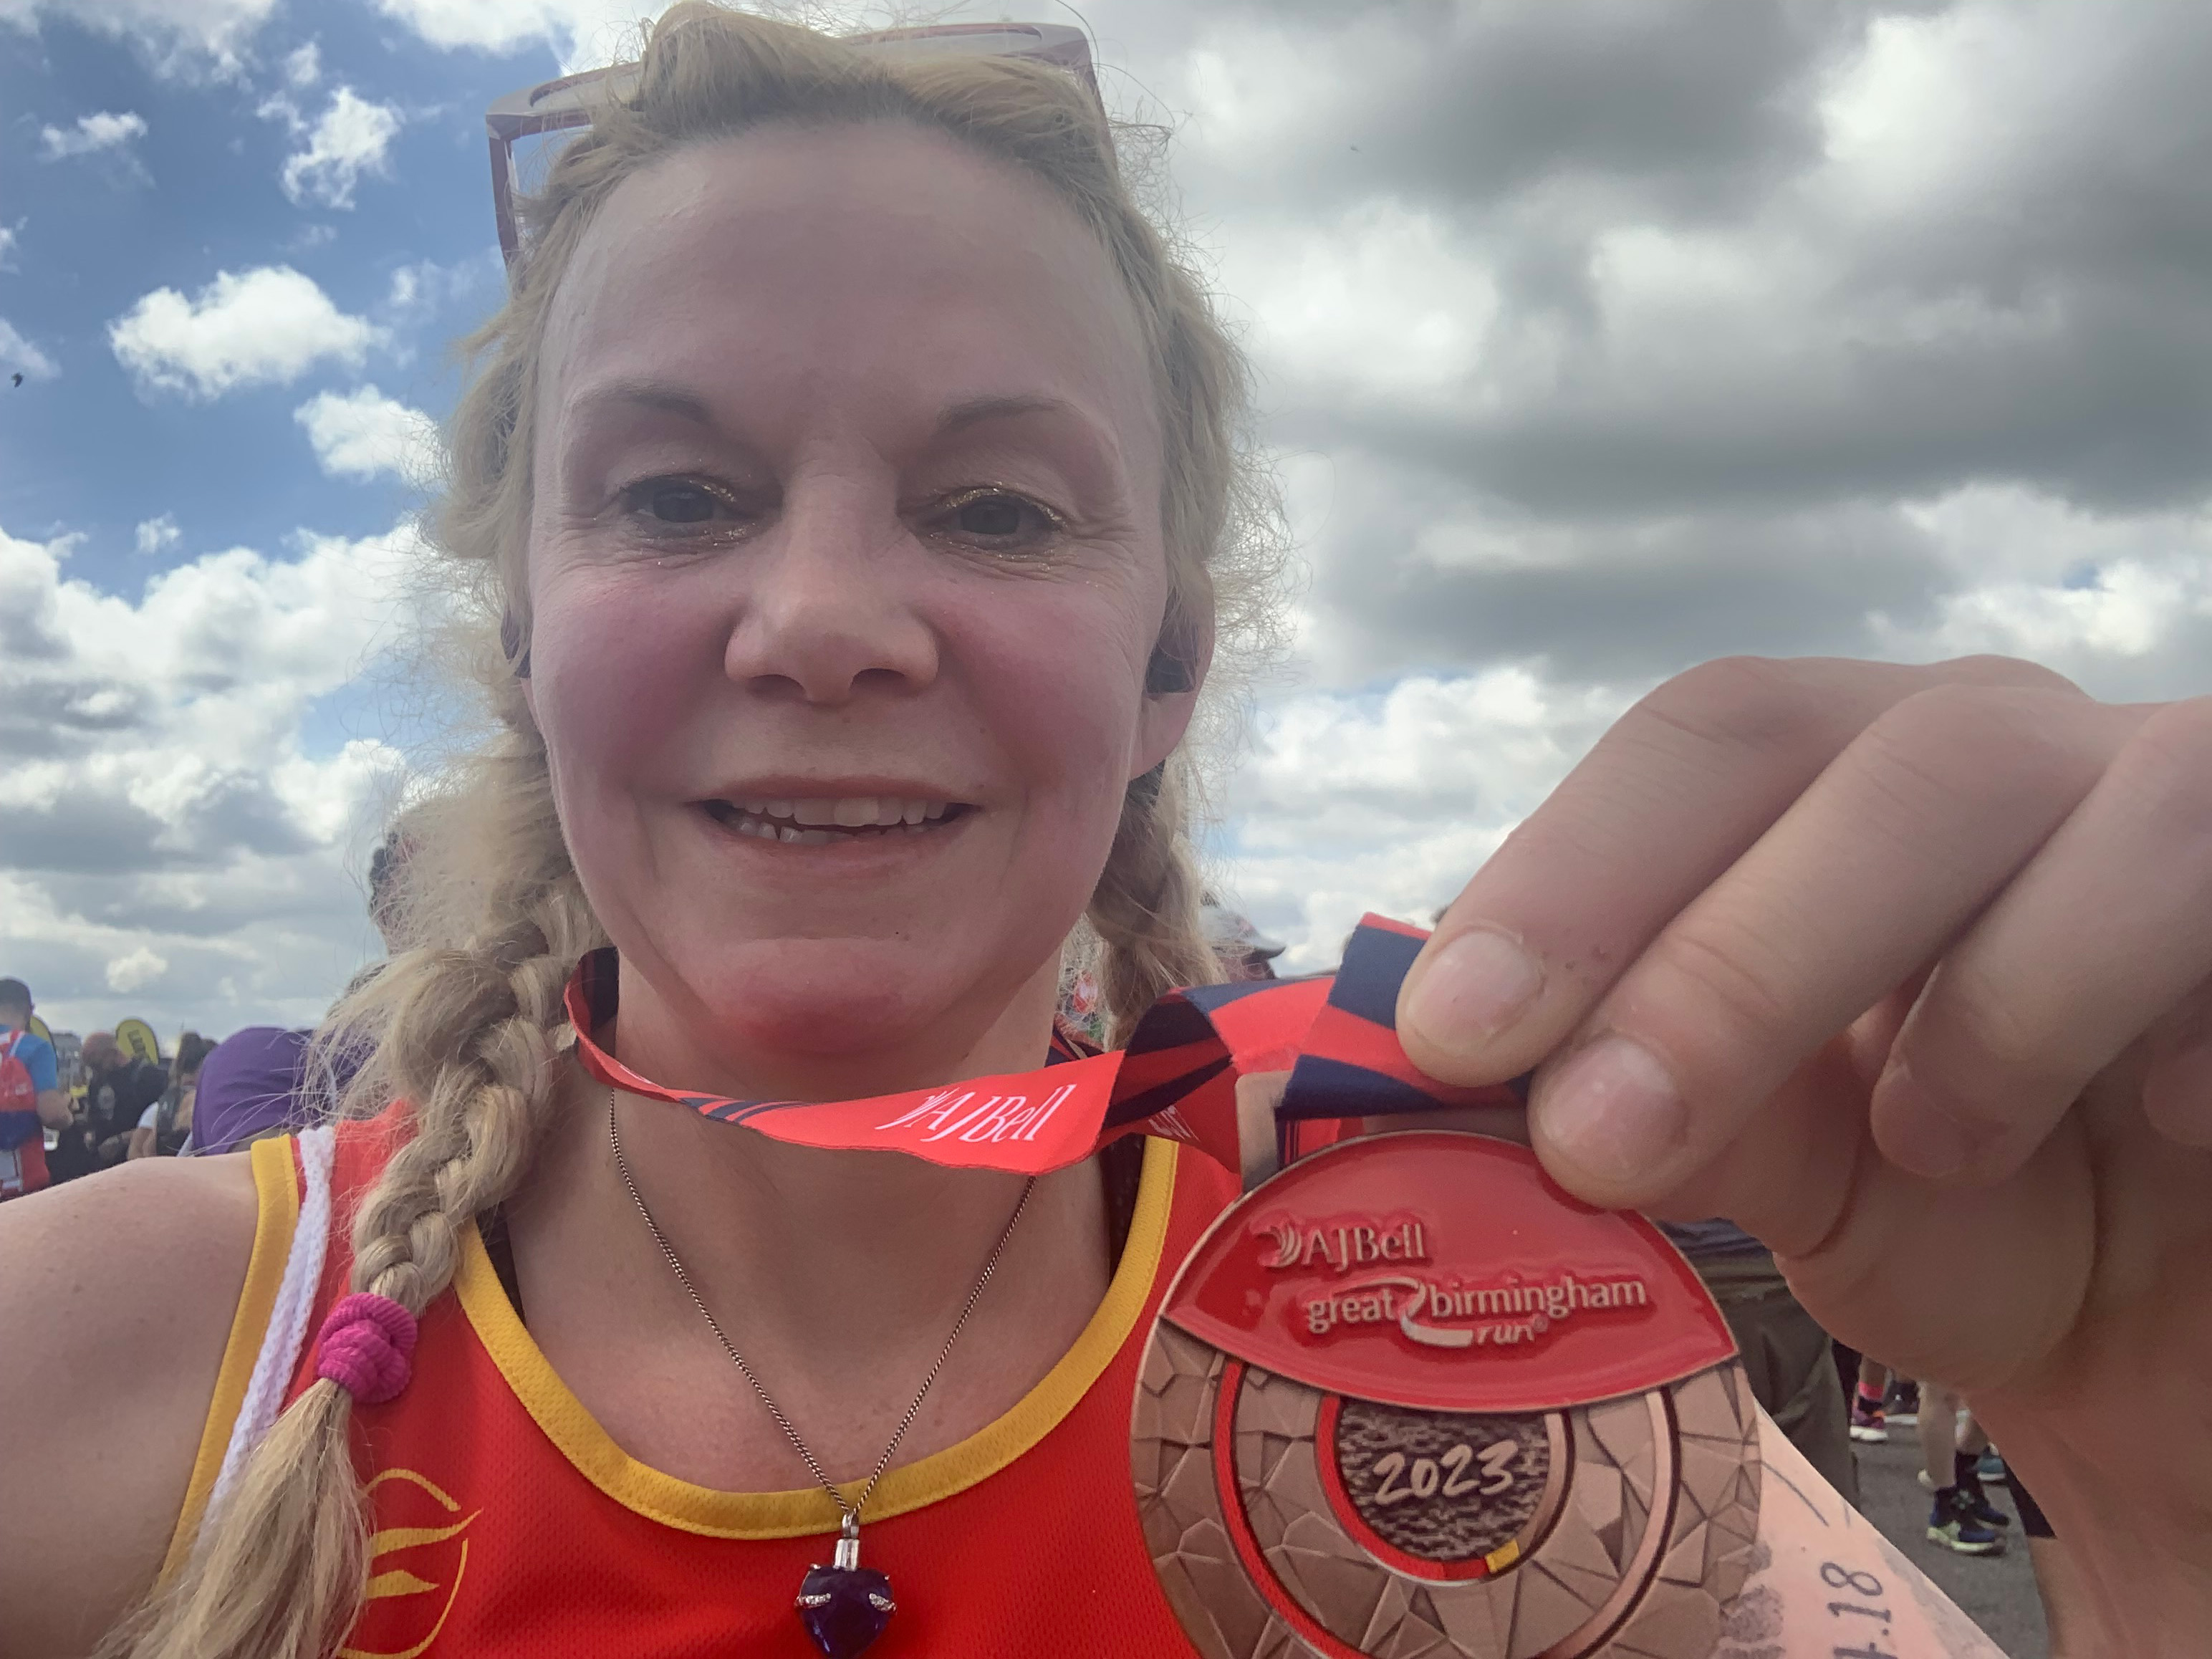 Freya who is running the Brighton marathon is pictured with a medal from the Great Birmingham Run